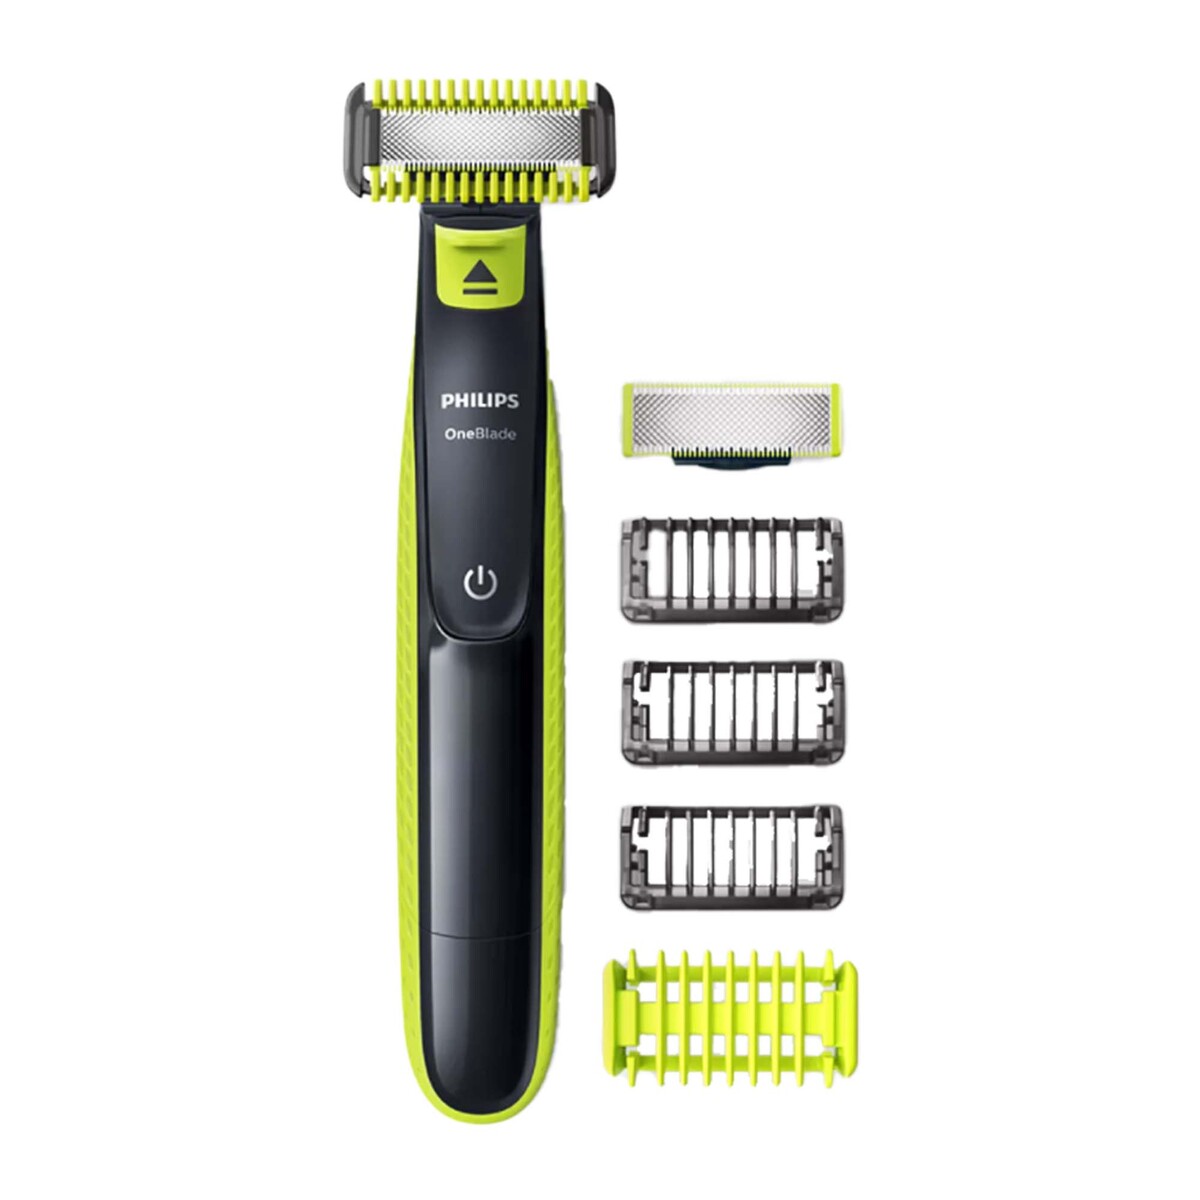 Philips OneBlade Shaver QP2620